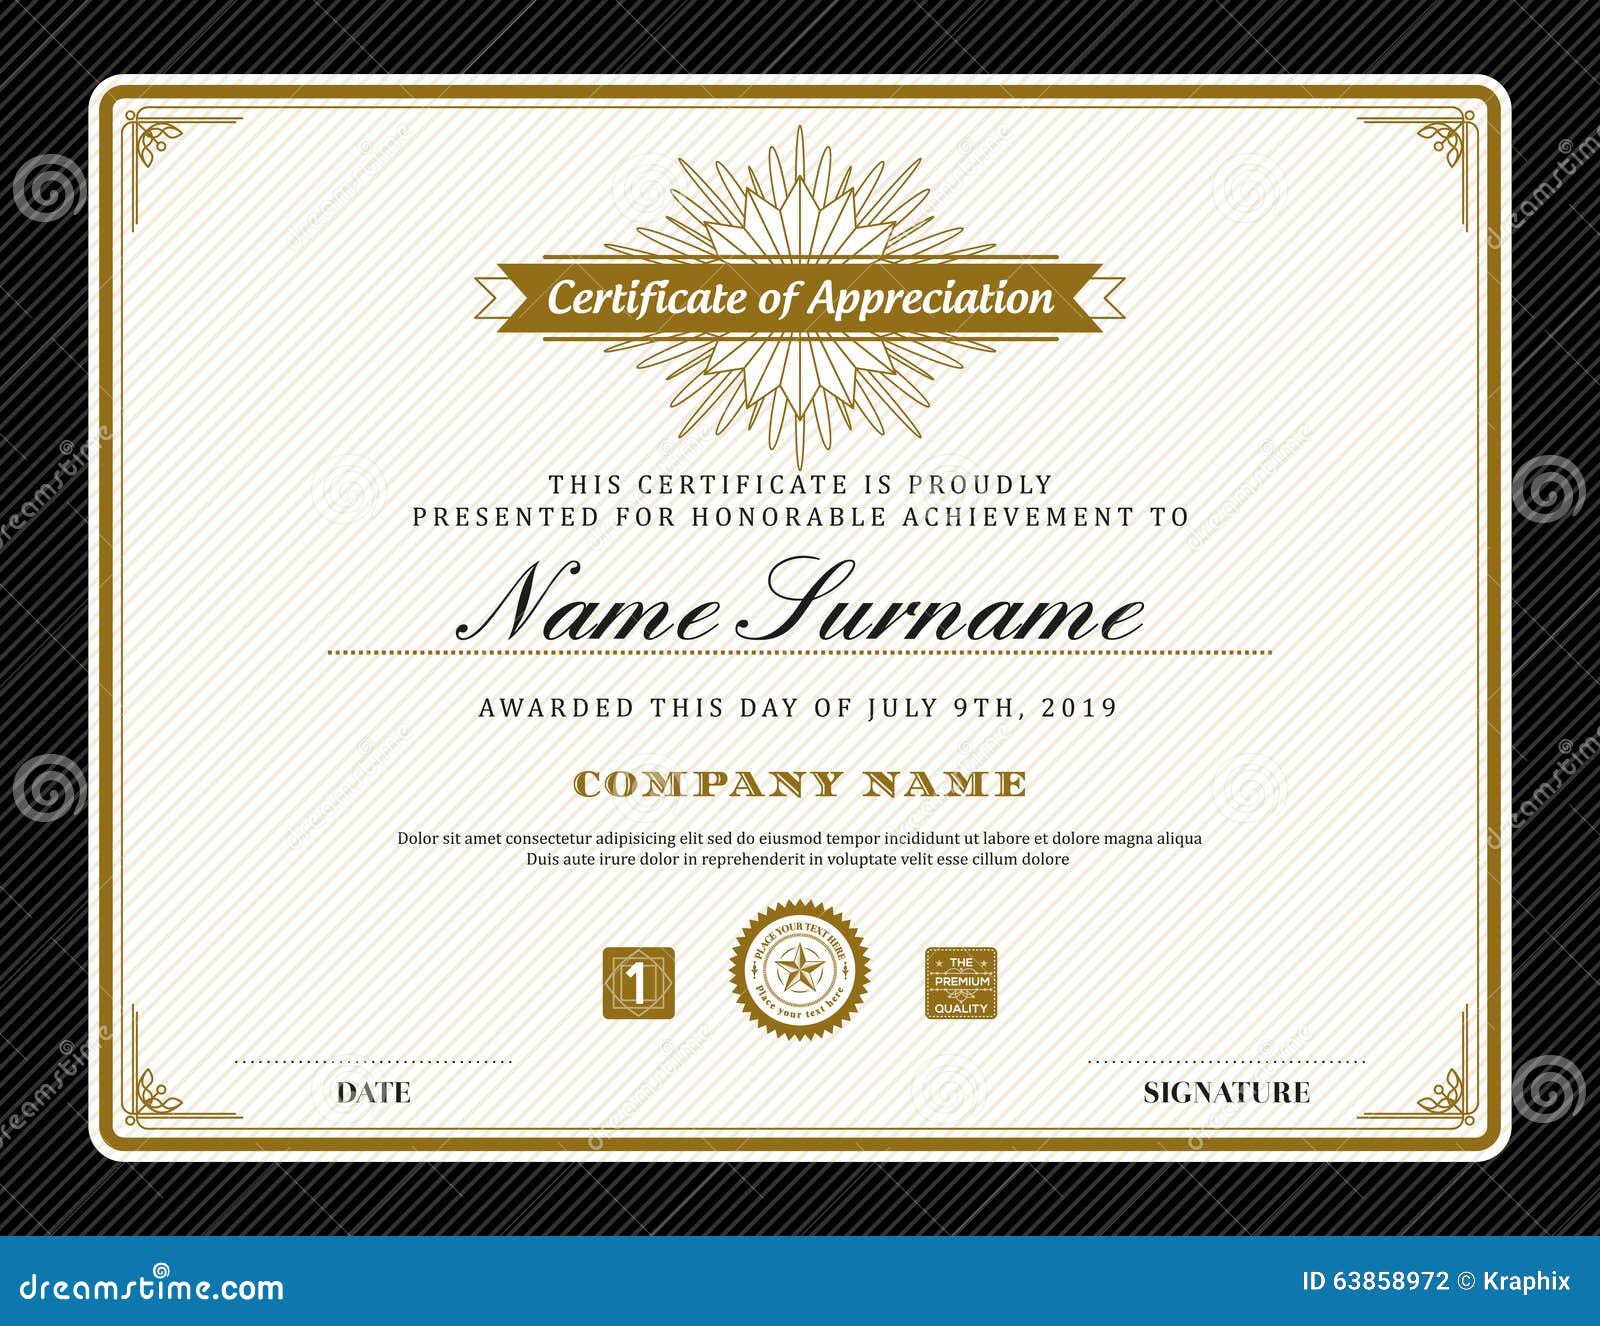 Vintage Retro Art Deco Frame Certificate Background Template Stock Throughout Free Art Certificate Templates